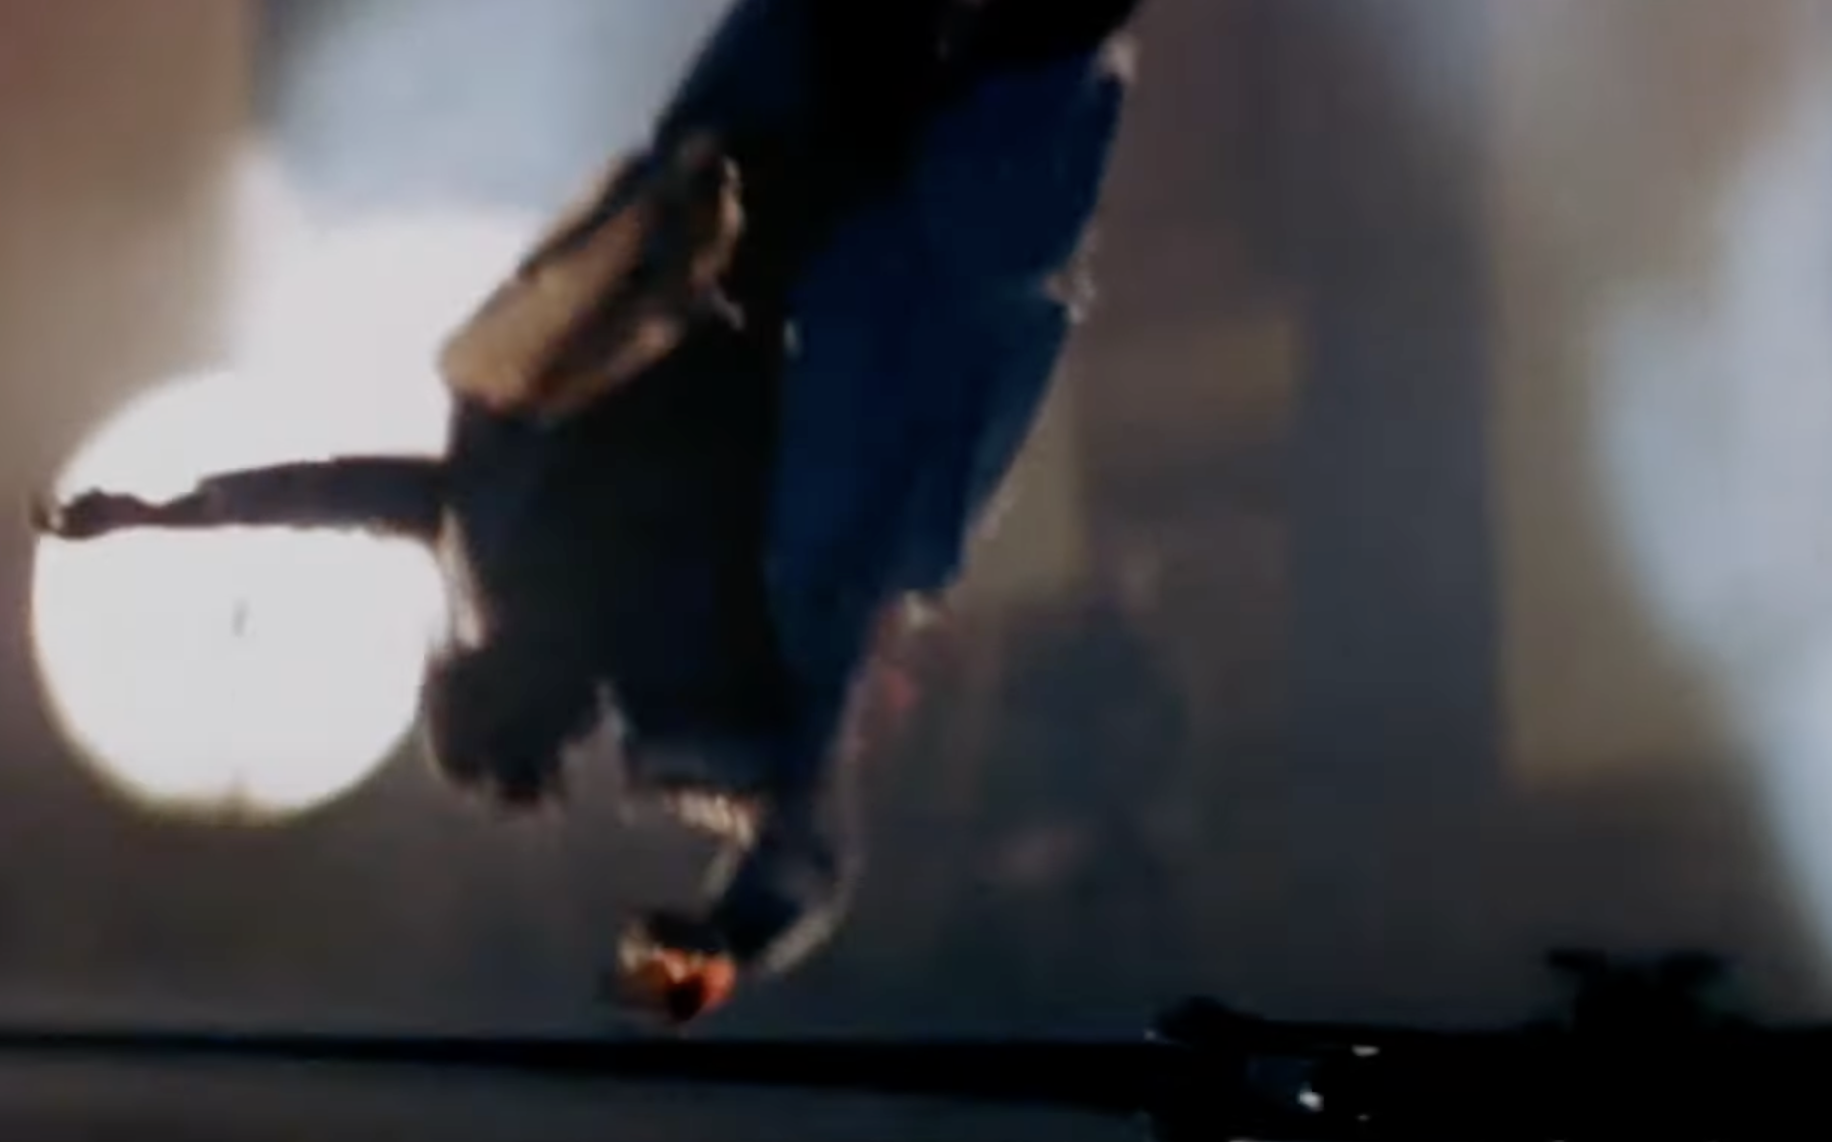 'I think the craziest stunt ever, has to be the end action scene in 'The Last Boy Scout'. At the end of this scene, a stuntman does a bungee dive 18 inches above a hovering helicopters rotors, in front of a crowd of about 35,000. If I remember right, they paid him a million dollars, and used...11? cameras, because there was only going to be one take. It is absolutely stunning, and will never be done again."